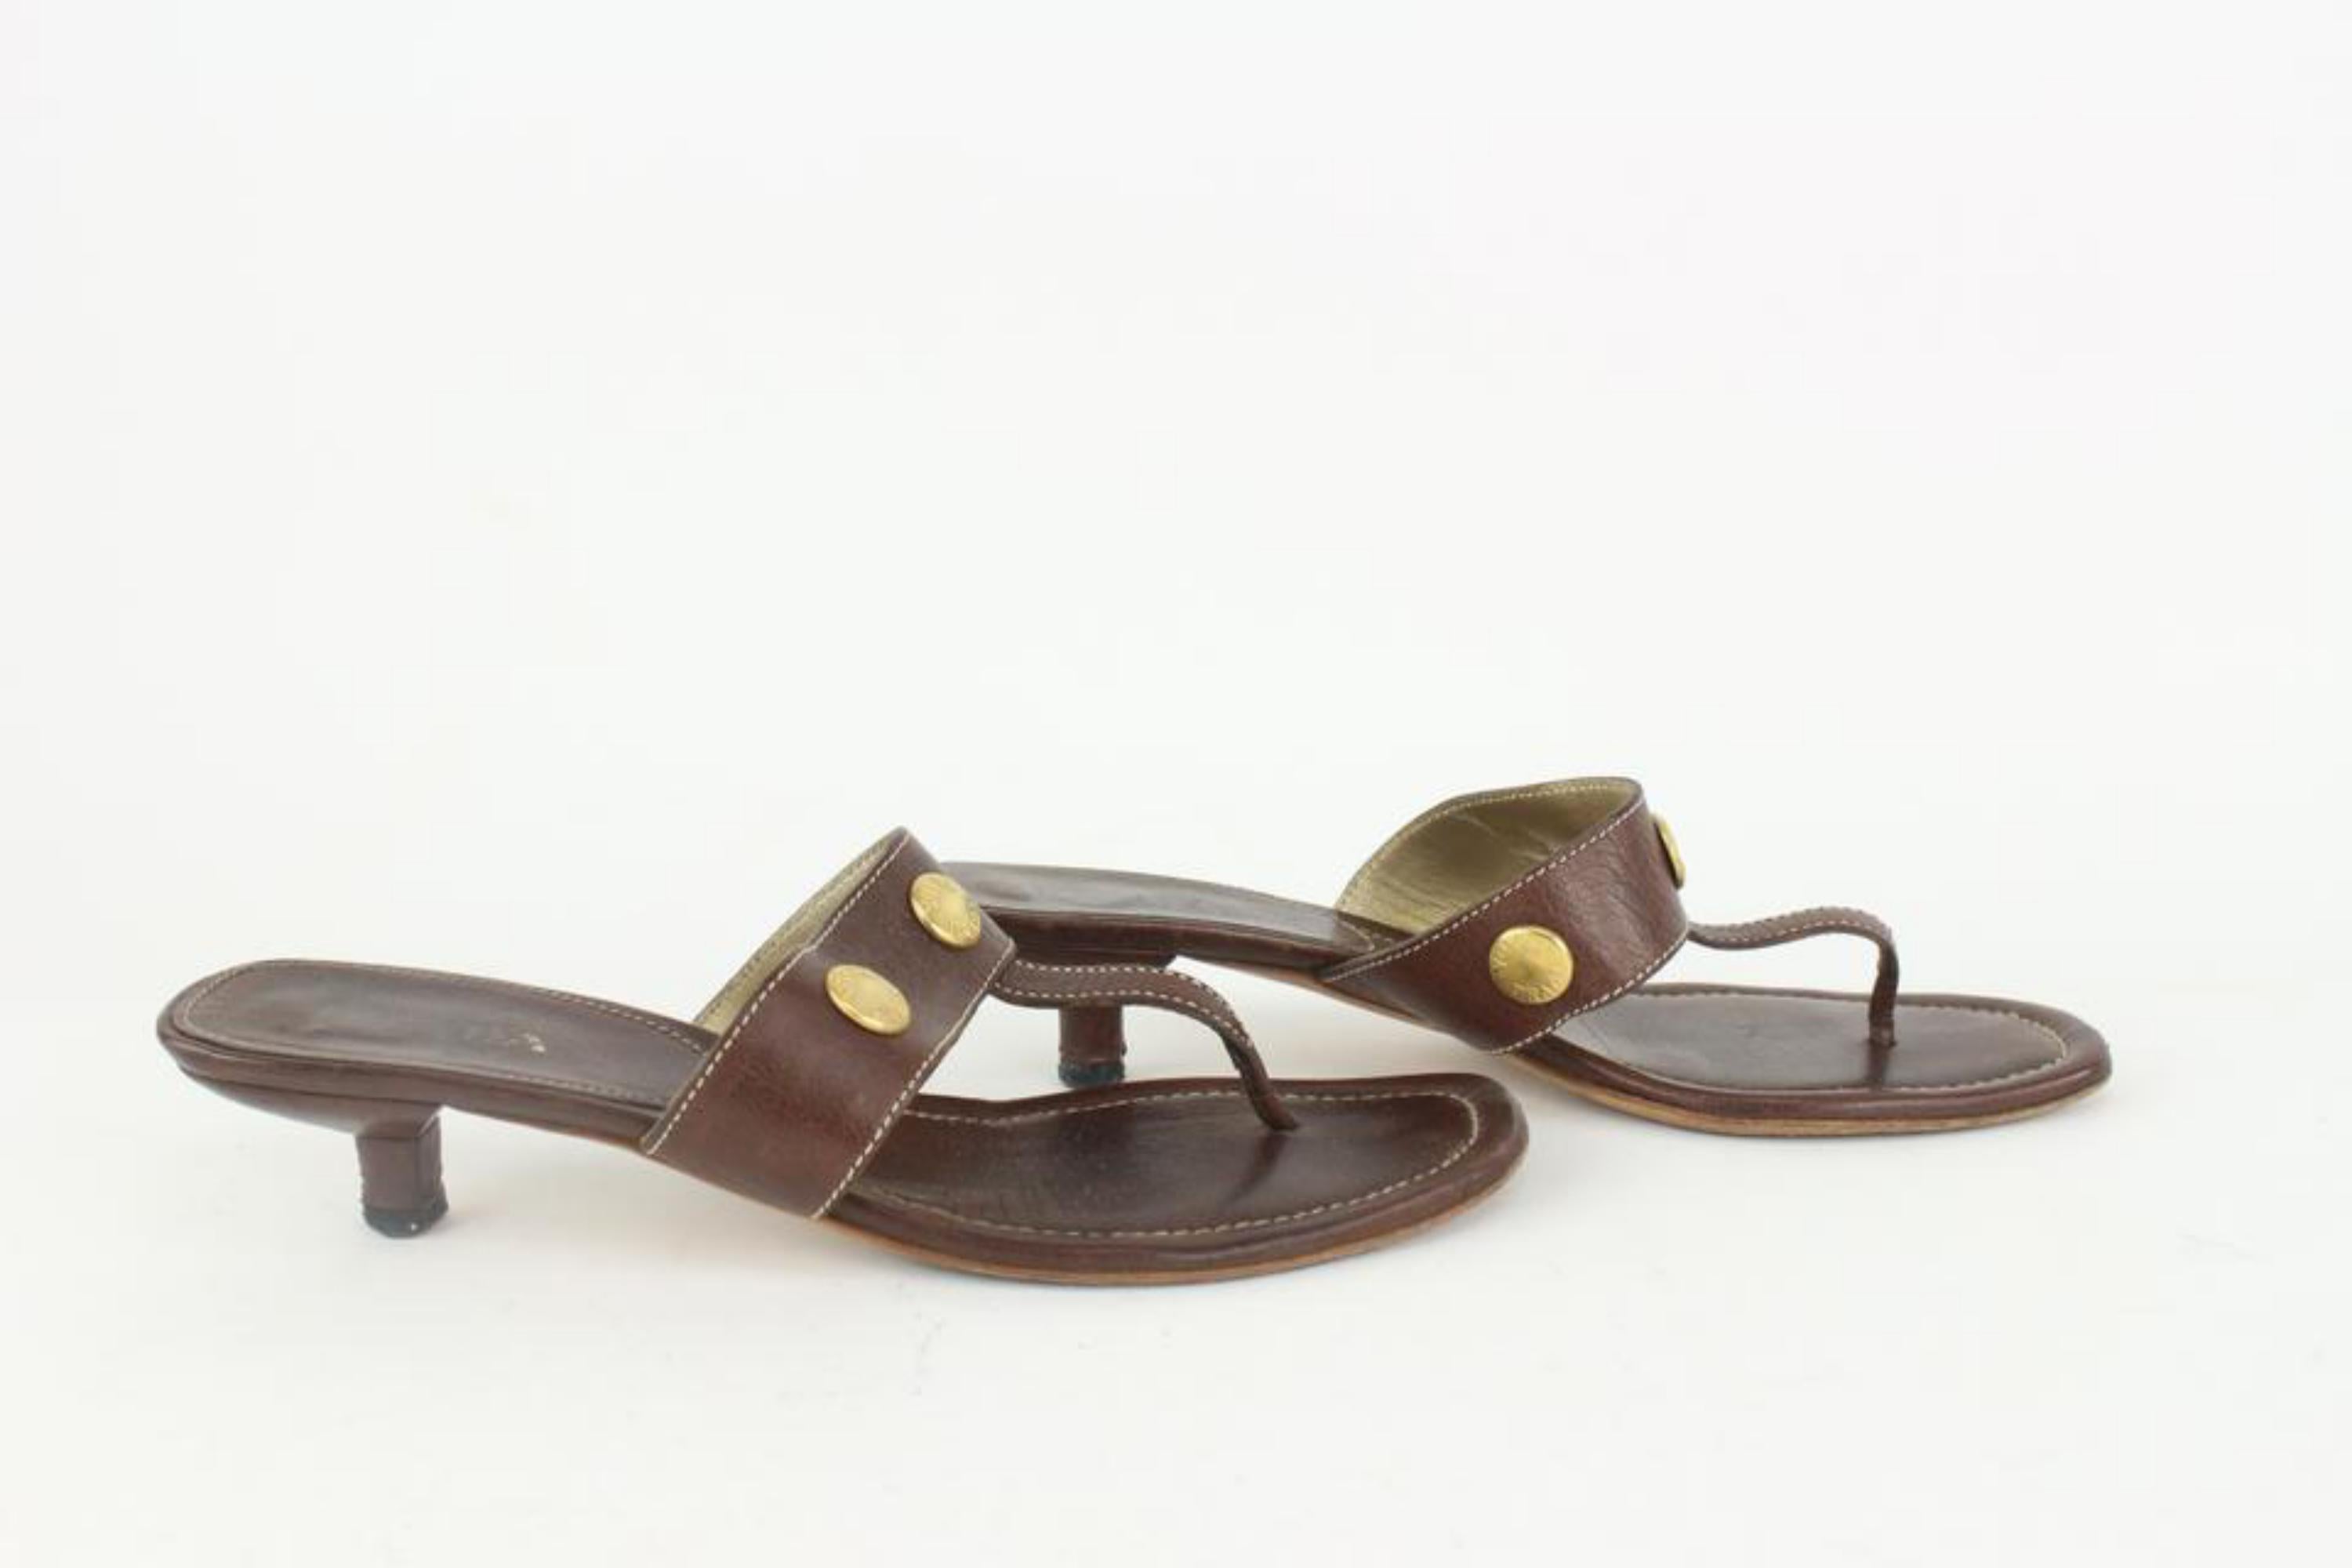 Prada Brown Leather Studded Gladiator Tong Sandal Thong Kitten Mules 1117p1 In Fair Condition For Sale In Dix hills, NY